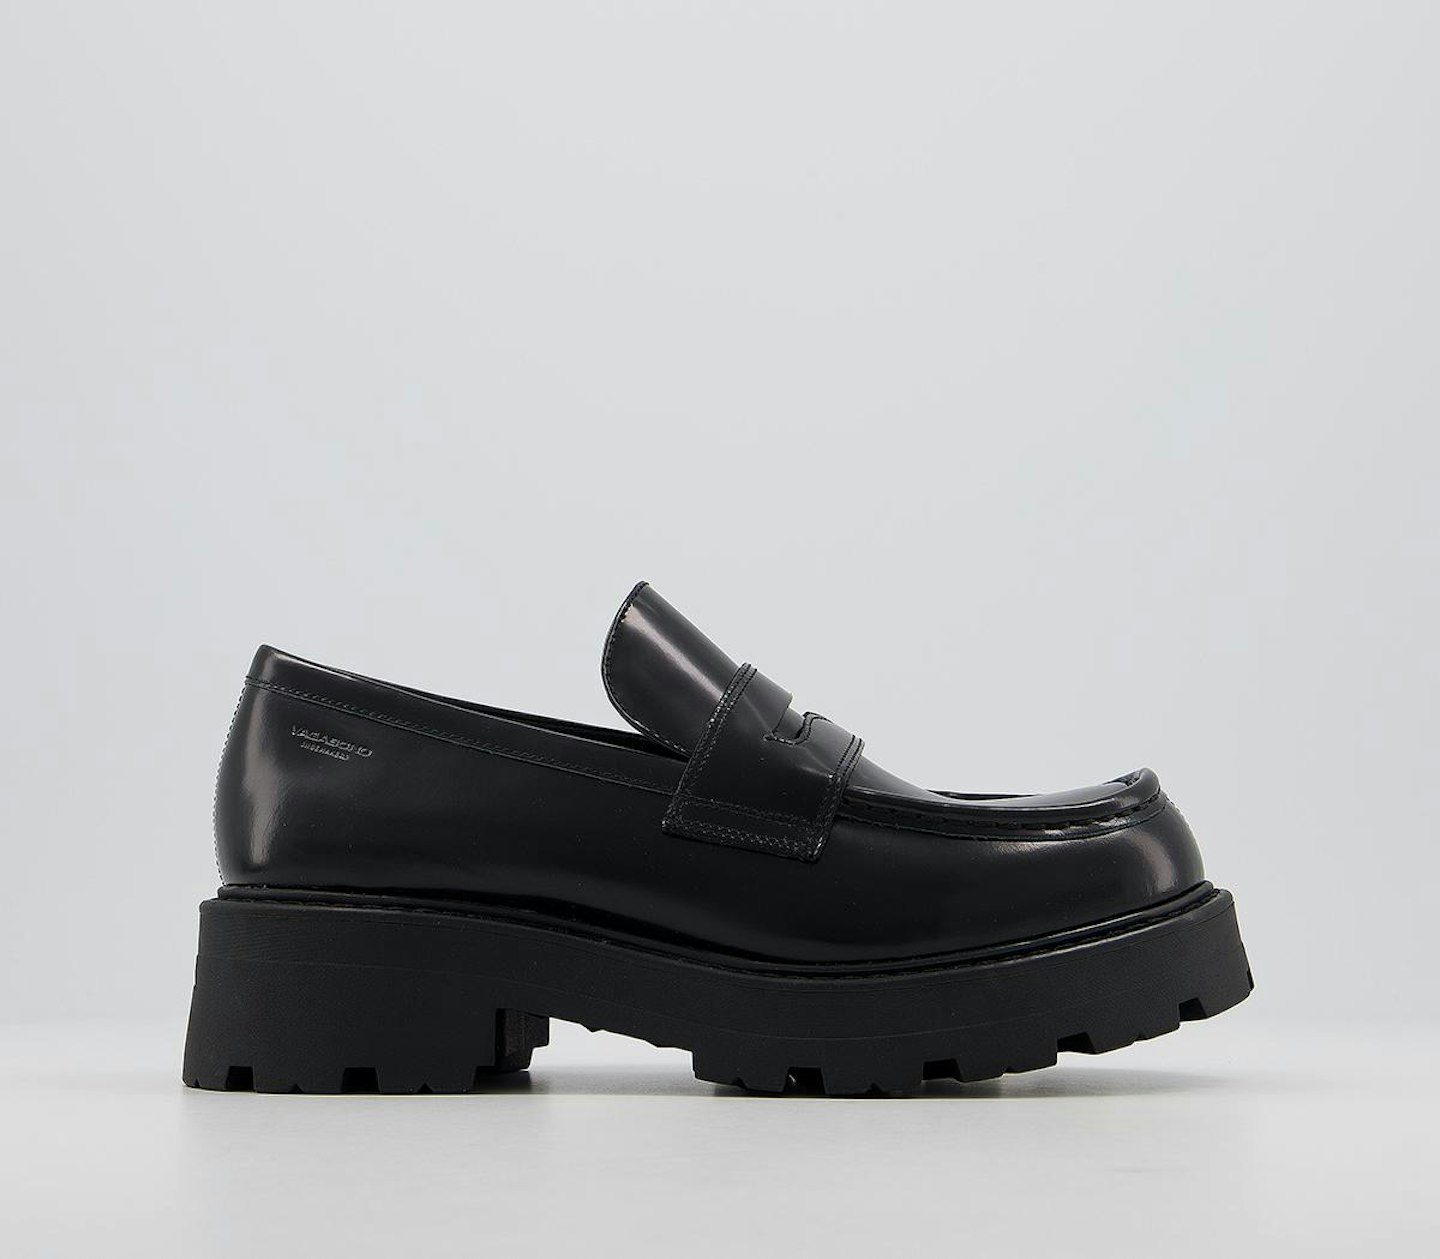 Vagabond, Cosmo Loafers, £94.99